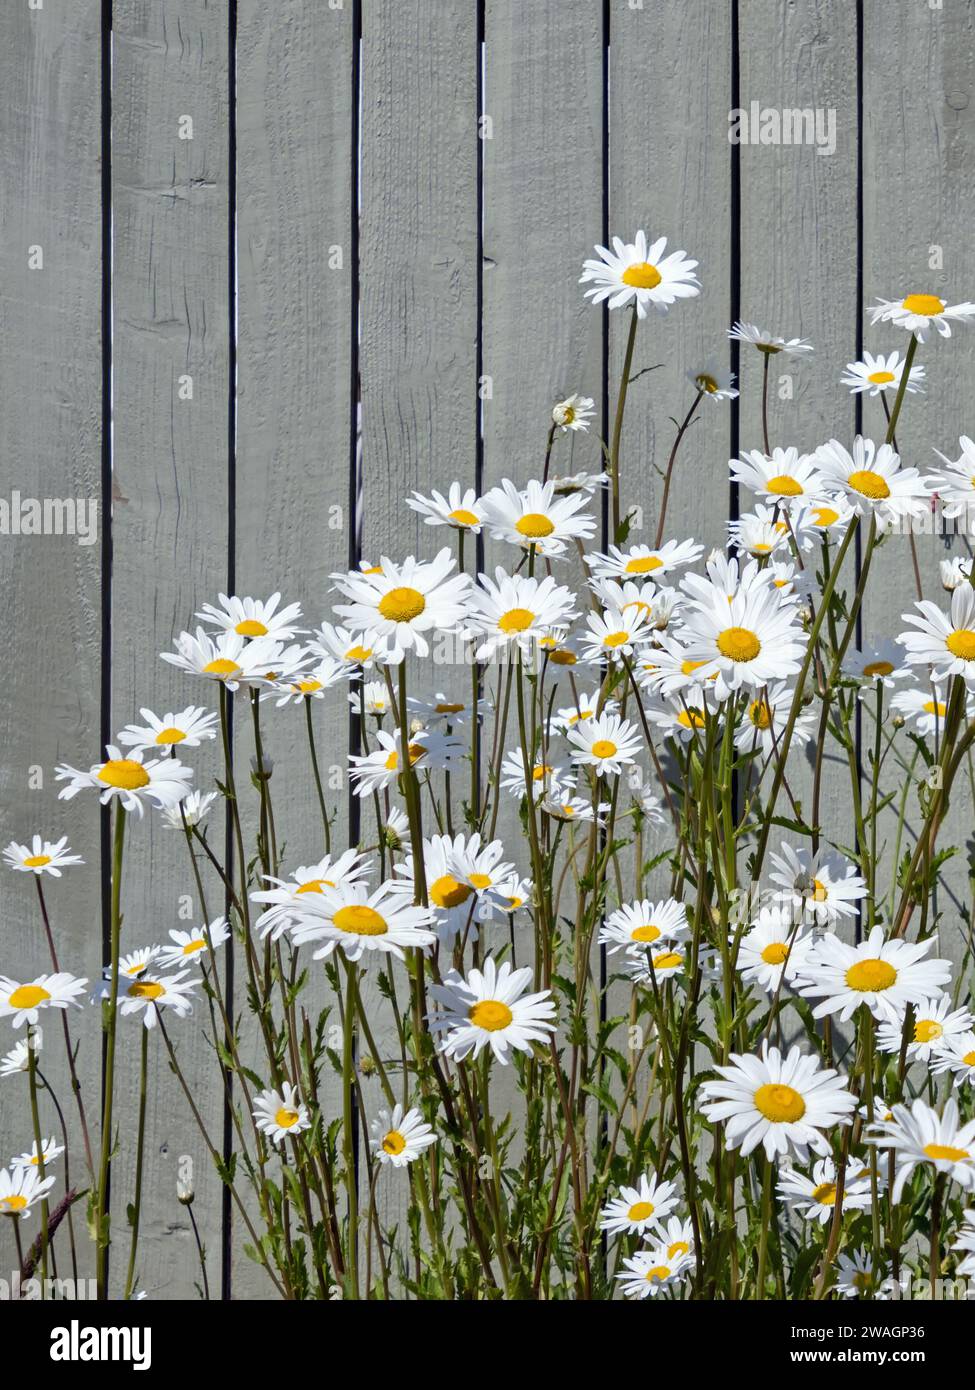 Daisies with white flowers in front of wooden fence painted gray Stock Photo